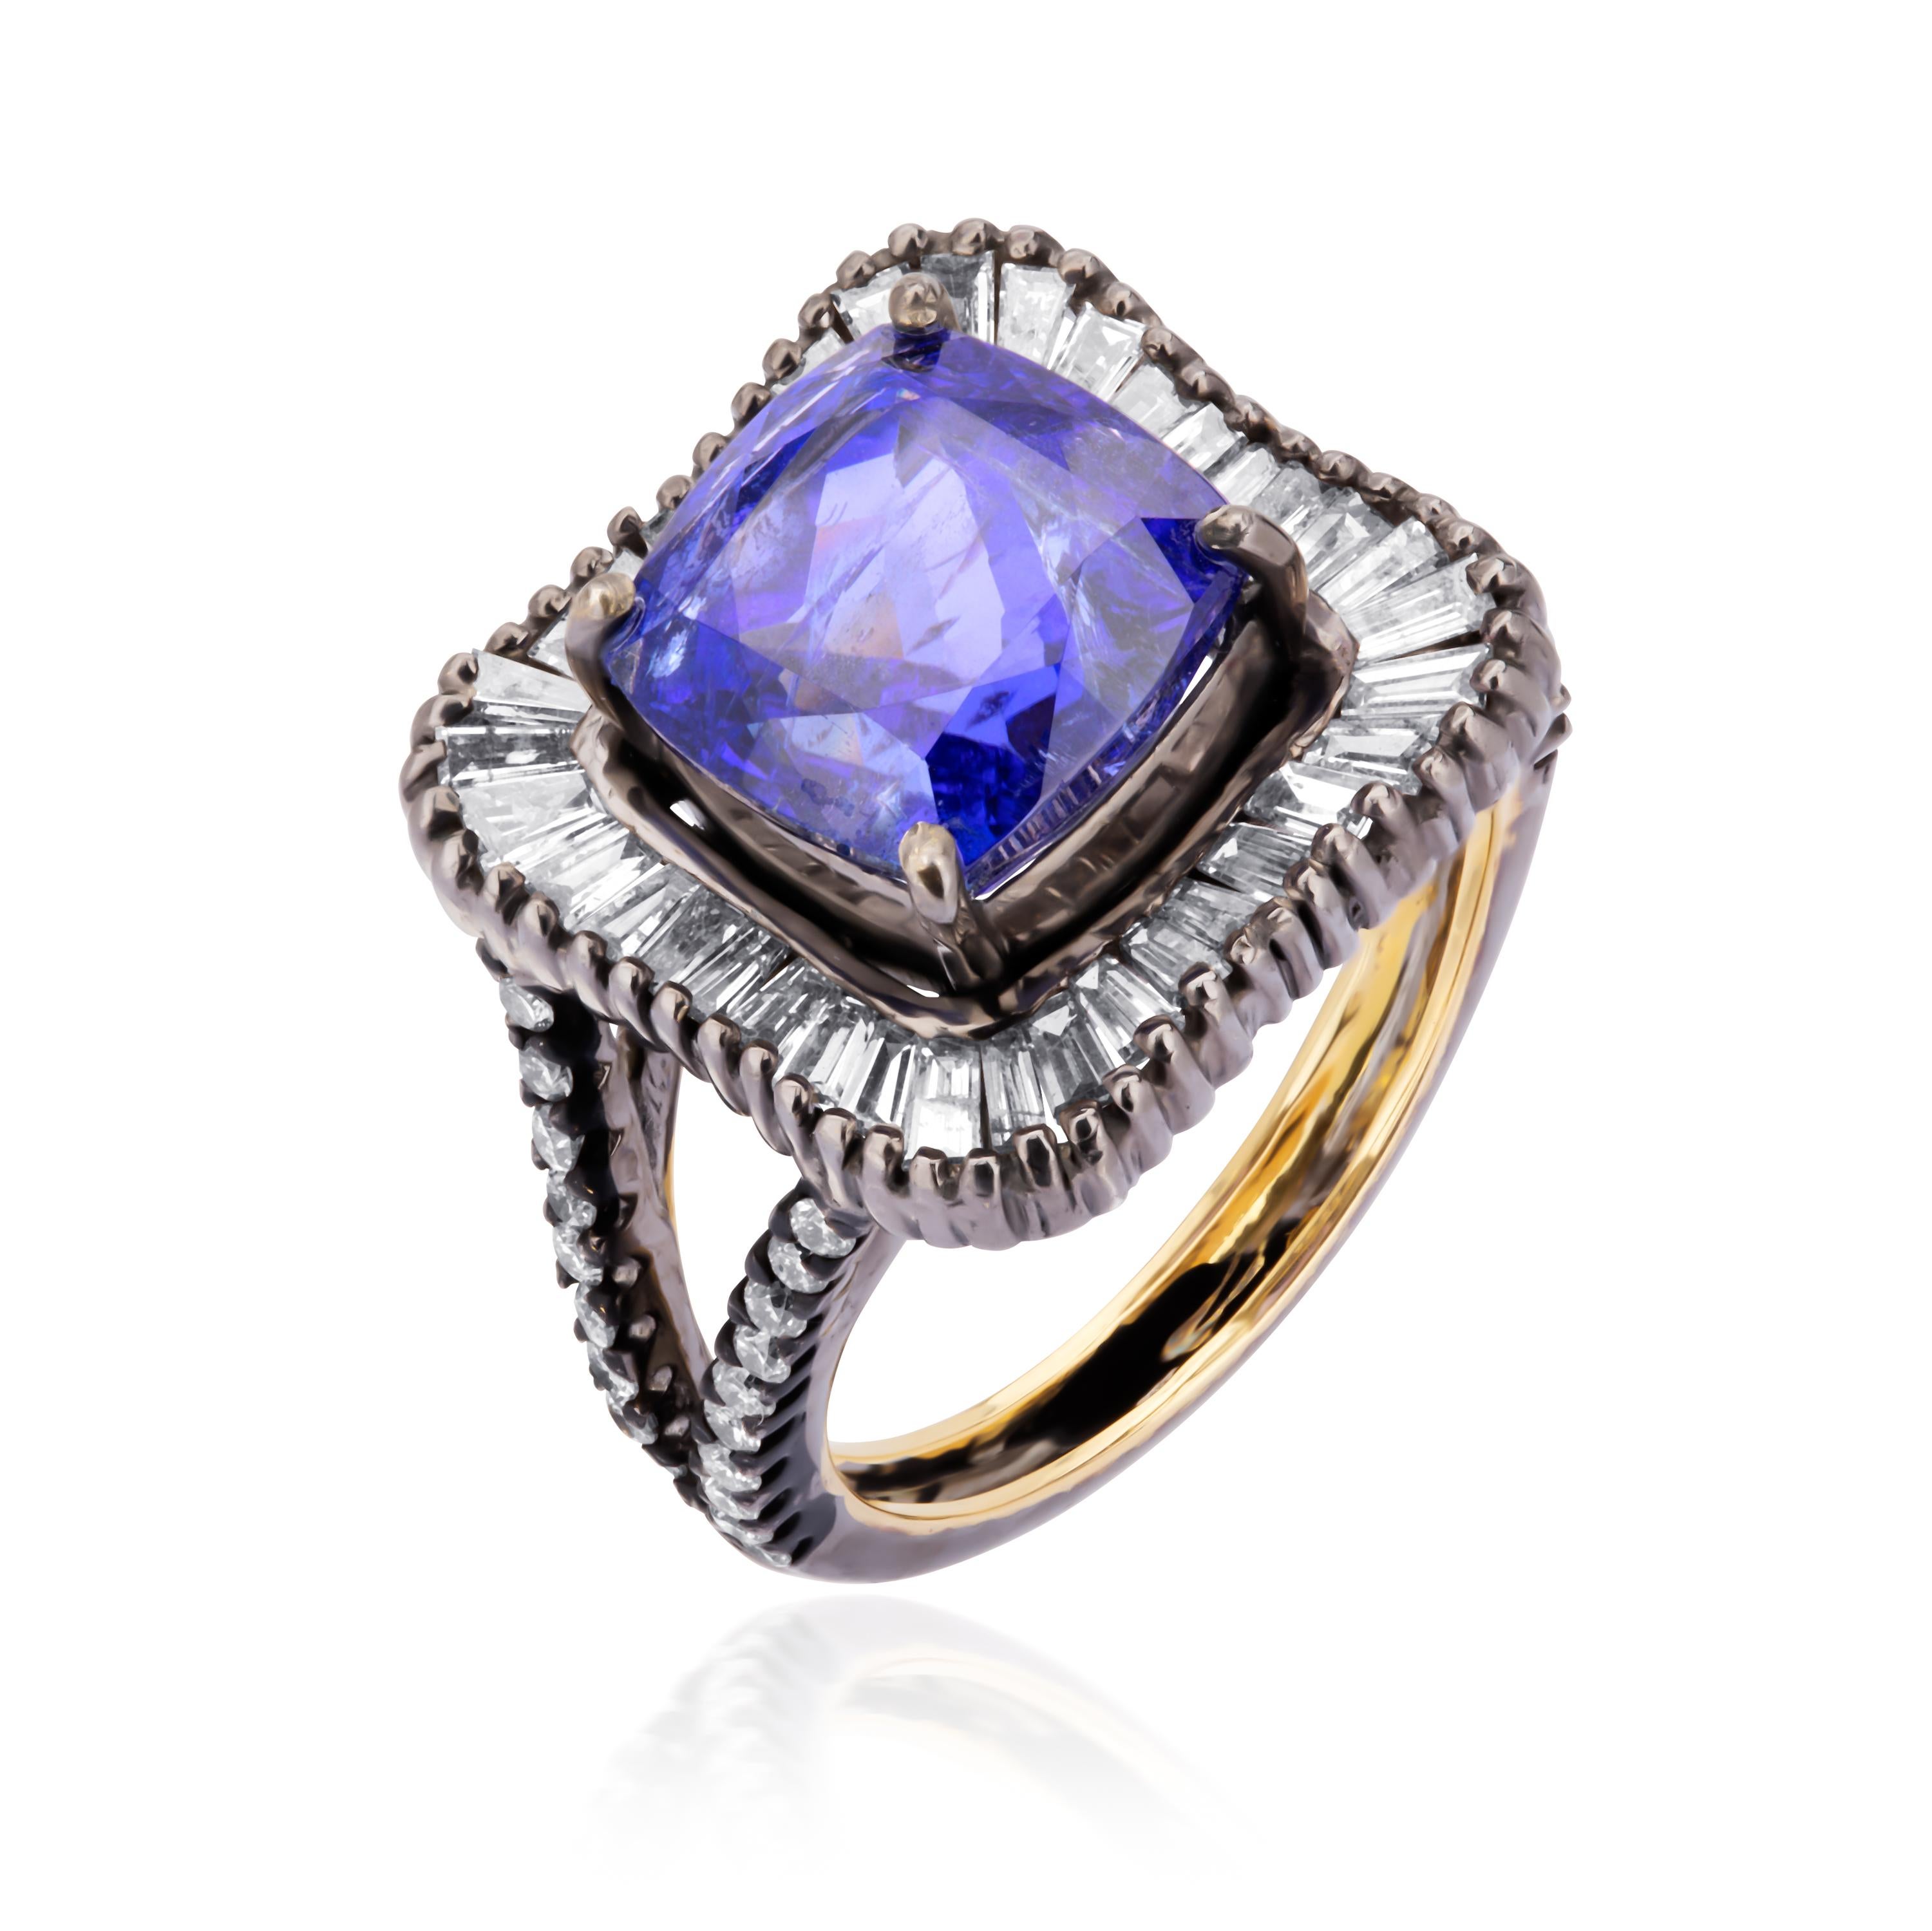 A classic ring that is bound to steal your heart. This lovely Victorian jewel is highlighted with a rich cushion cut tanzanite, weighing 5.16 Cts, framed all around in a sparkling pool of baguette diamonds. The center design is accompanied with an